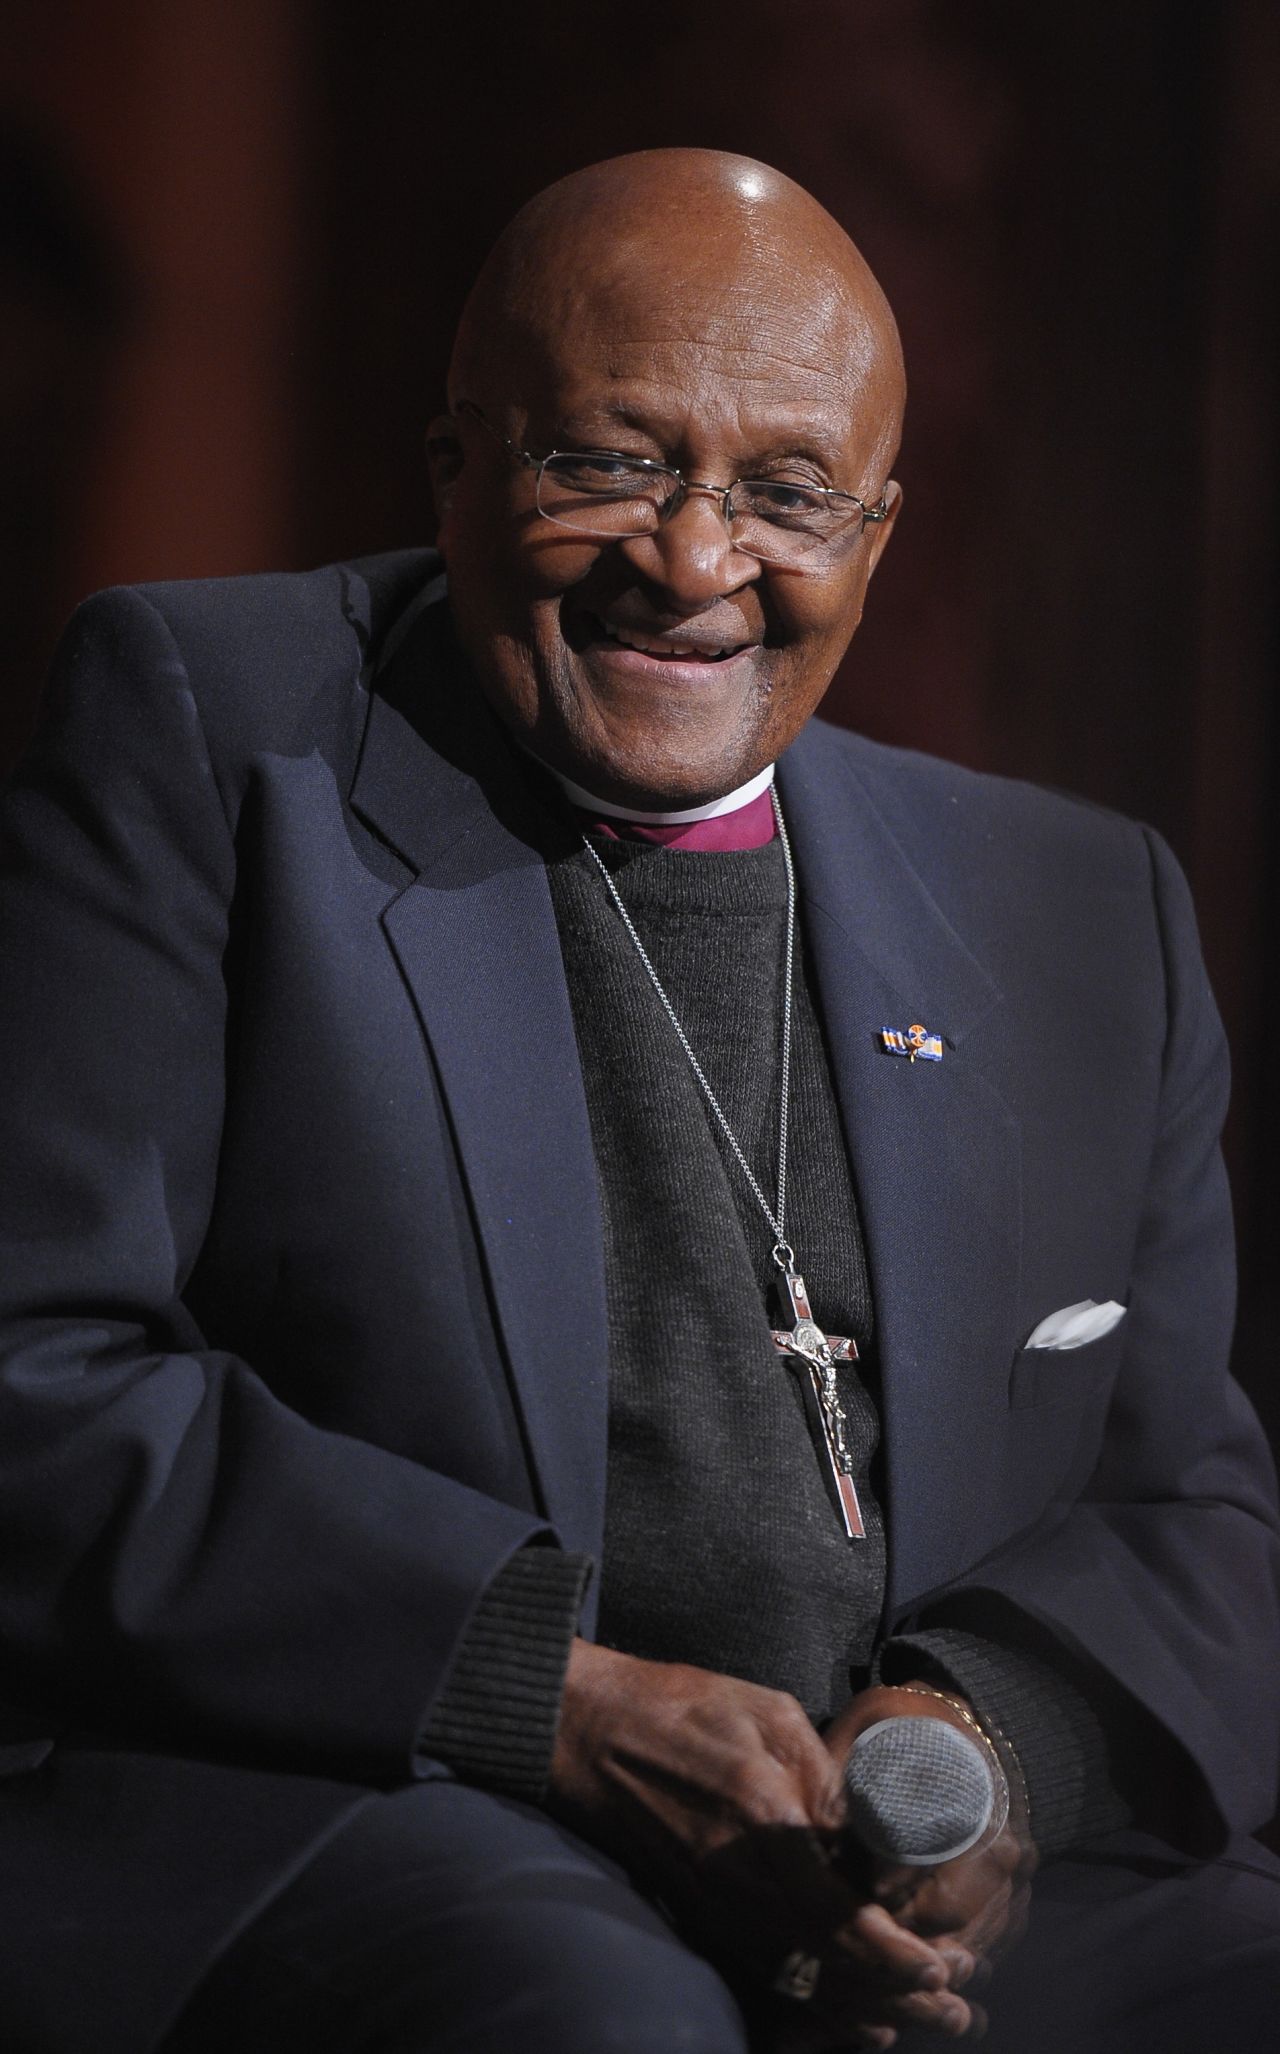 In 2012 the foundation awarded Archbishop Desmond Tutu a one-off $1 million special prize for his lifelong commitment towards "speaking truth to power."